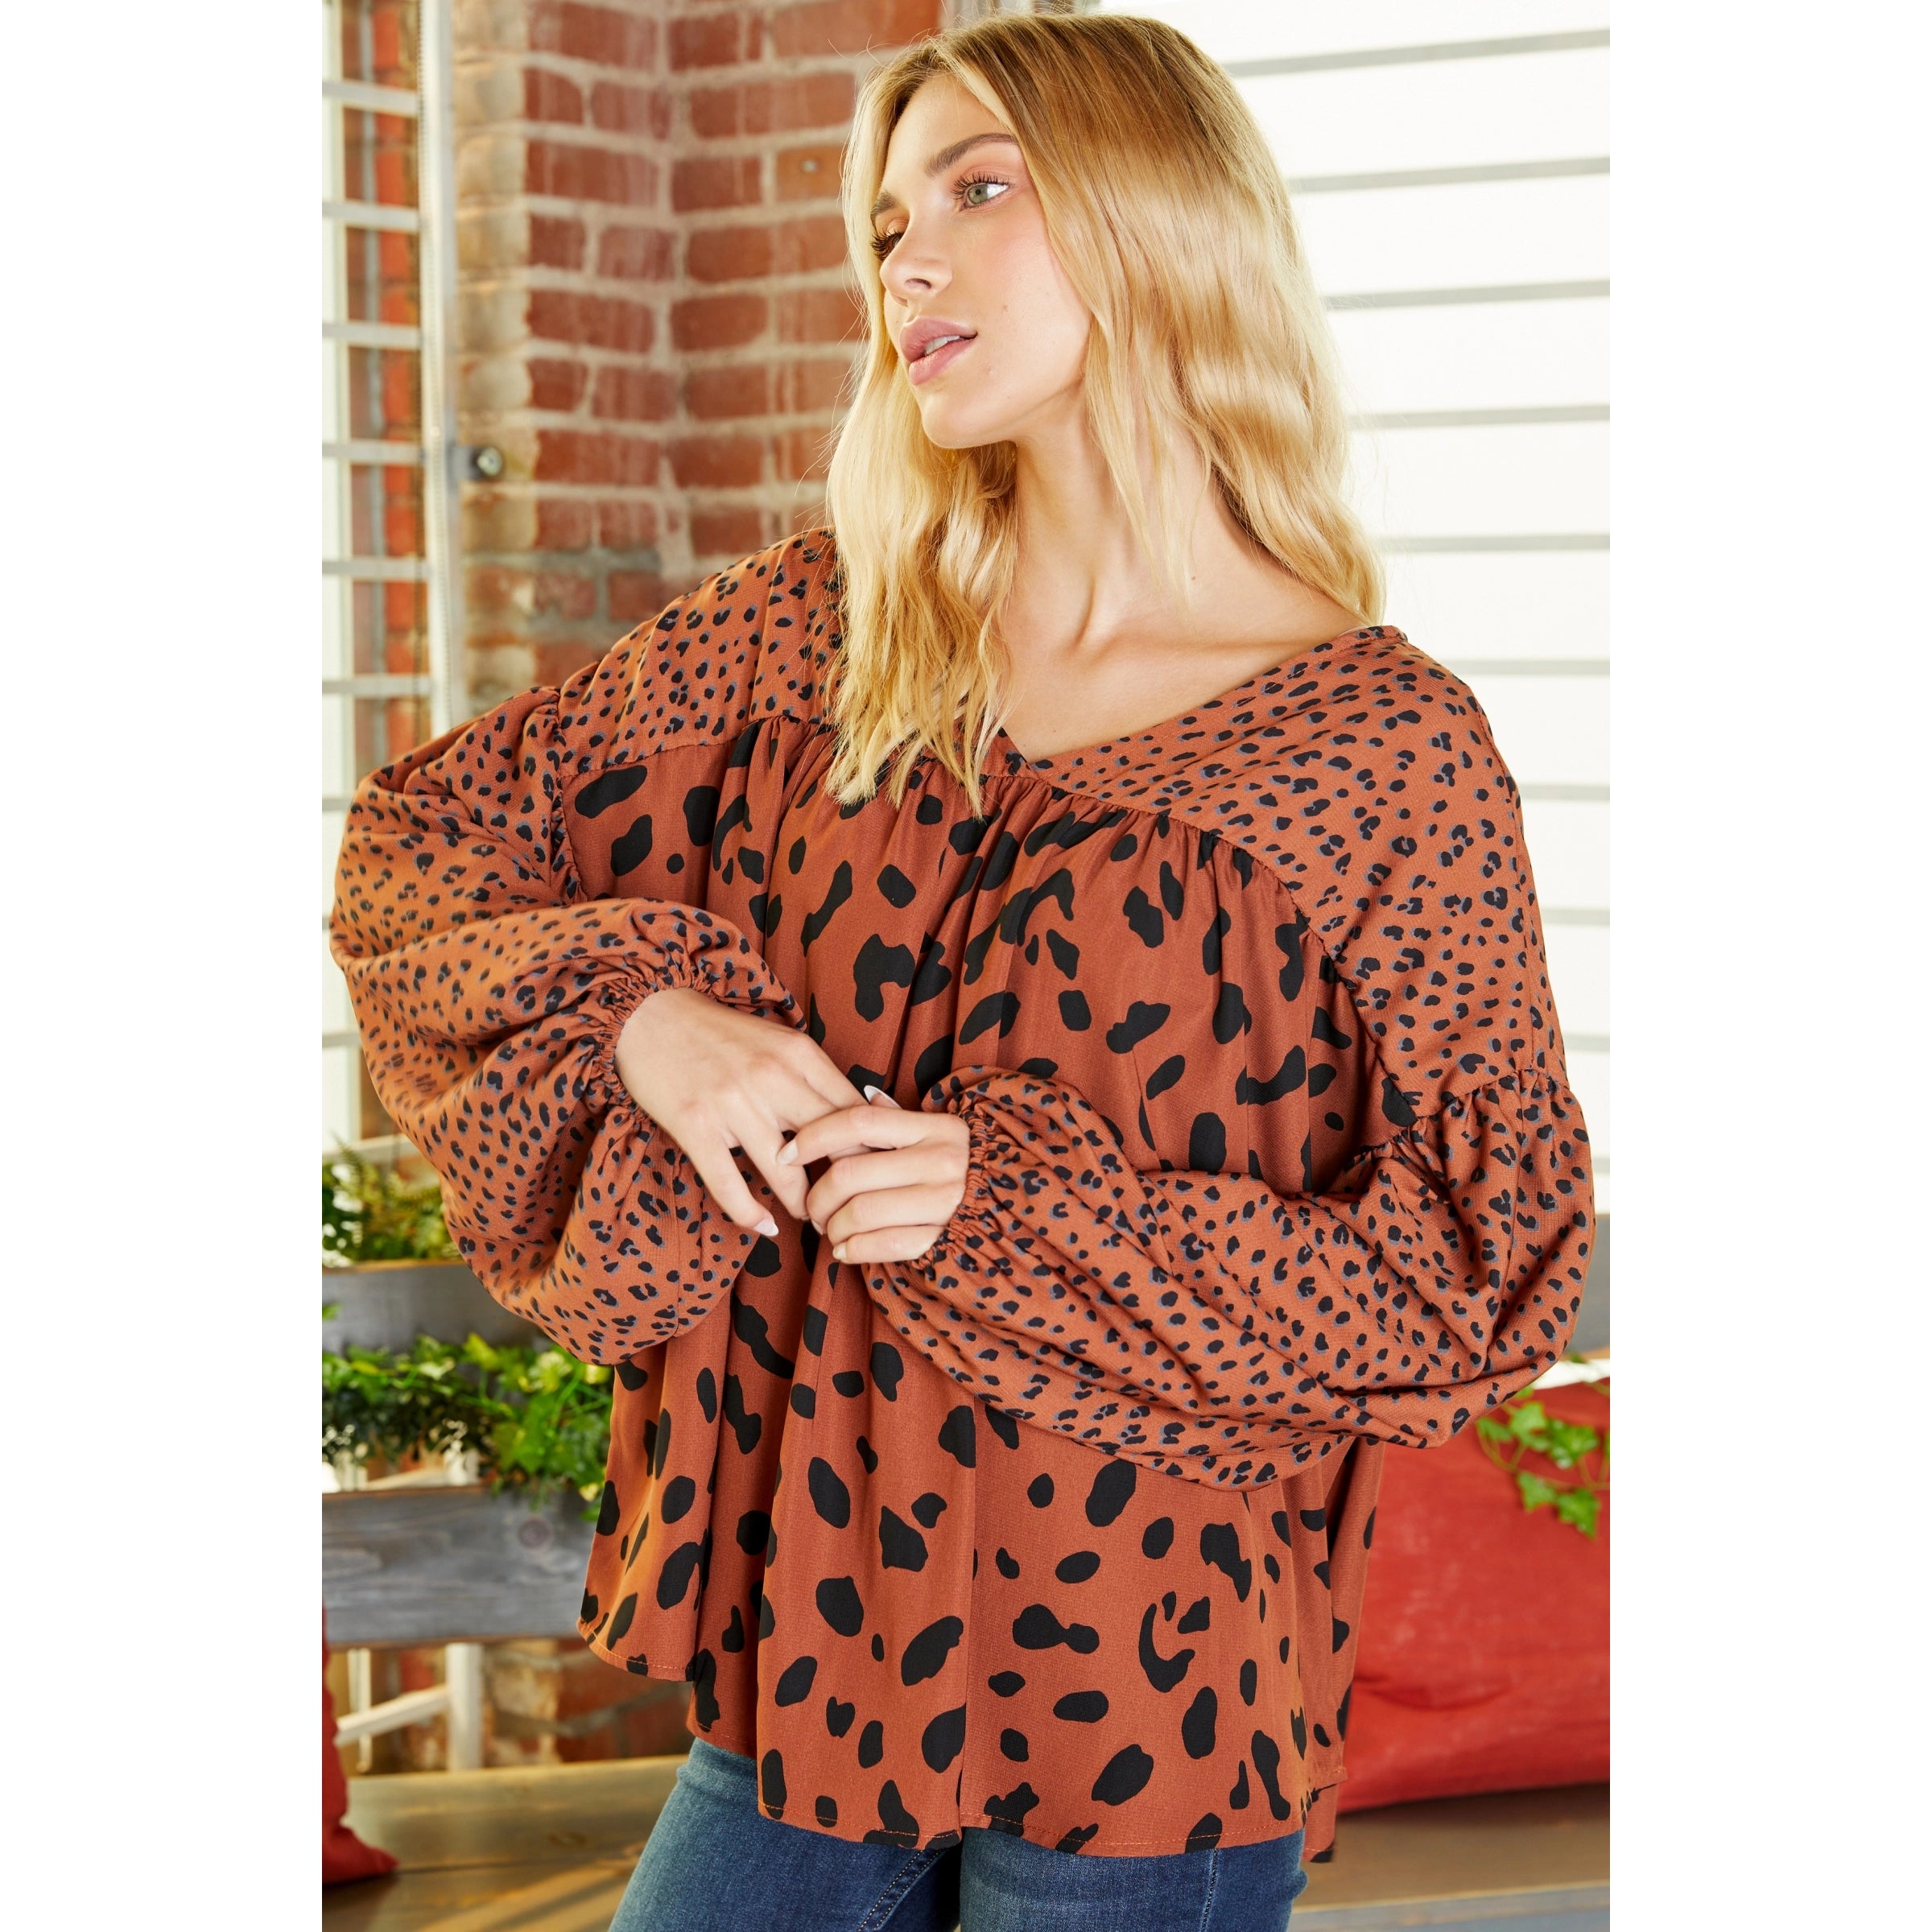 The Leopard Flare